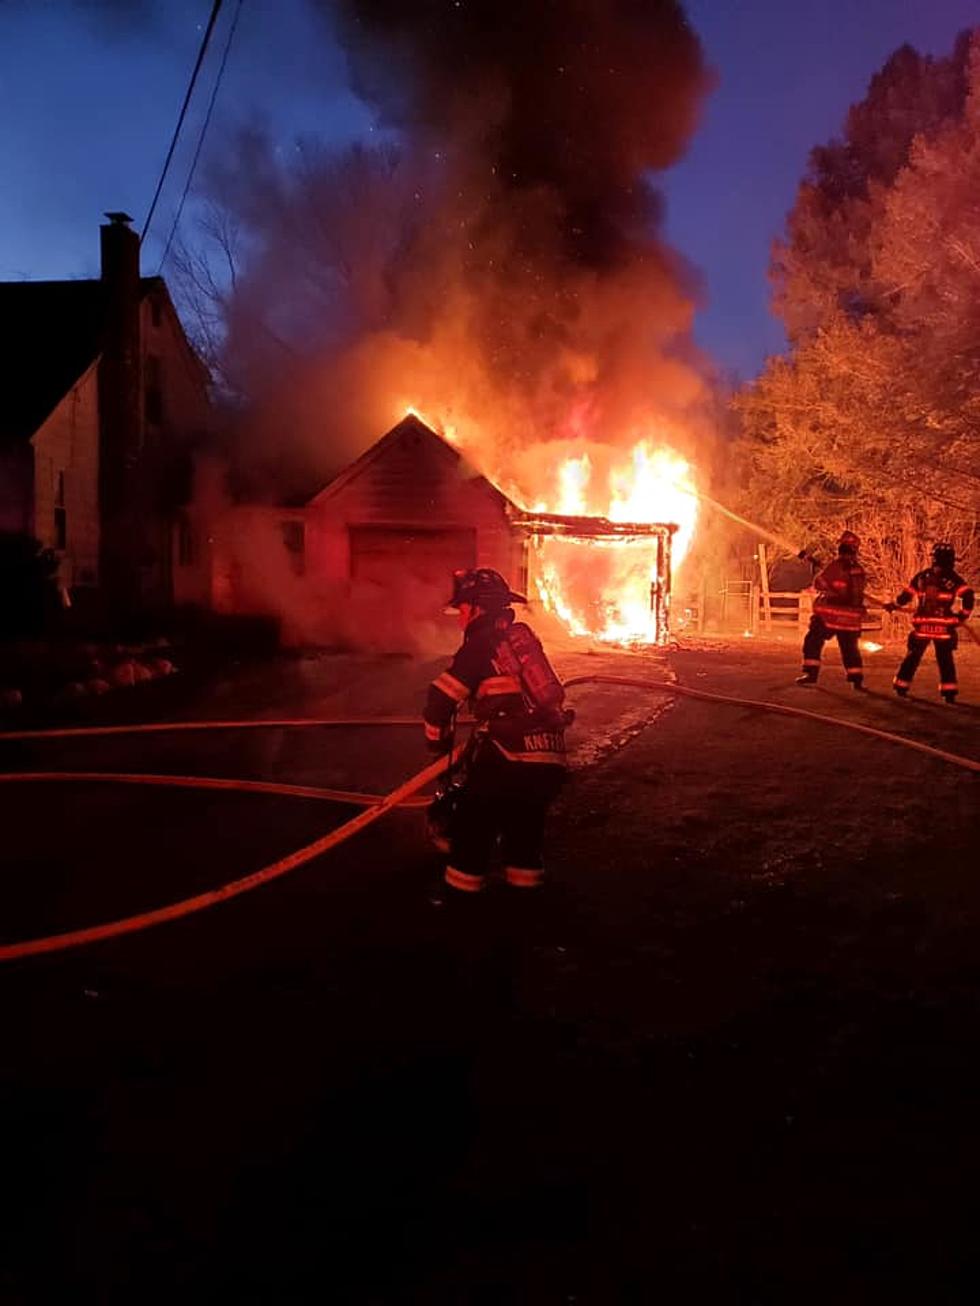 Sunday House Fire Reminds Hudson Valley to Support Fire Companies